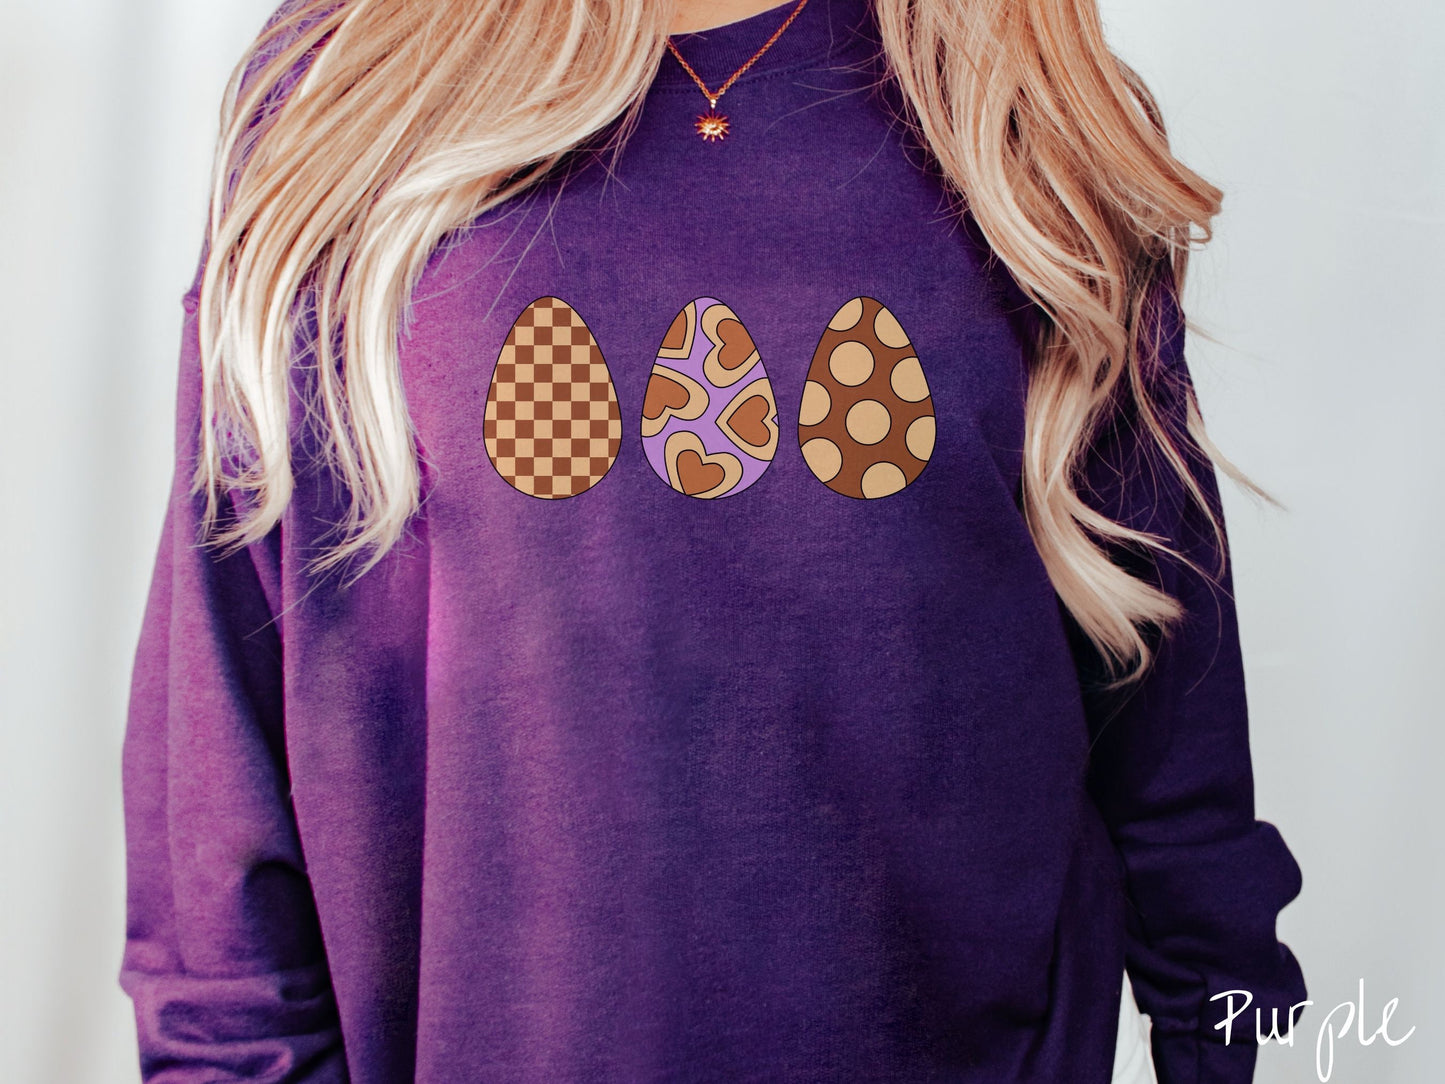 A woman wearing a cute, vintage purple colored sweatshirt with three Easter eggs. The left has a light yellow and brown checkerboard pattern, the middle is purple with light yellow brown hearts, and the right is brown with light yellow circles.